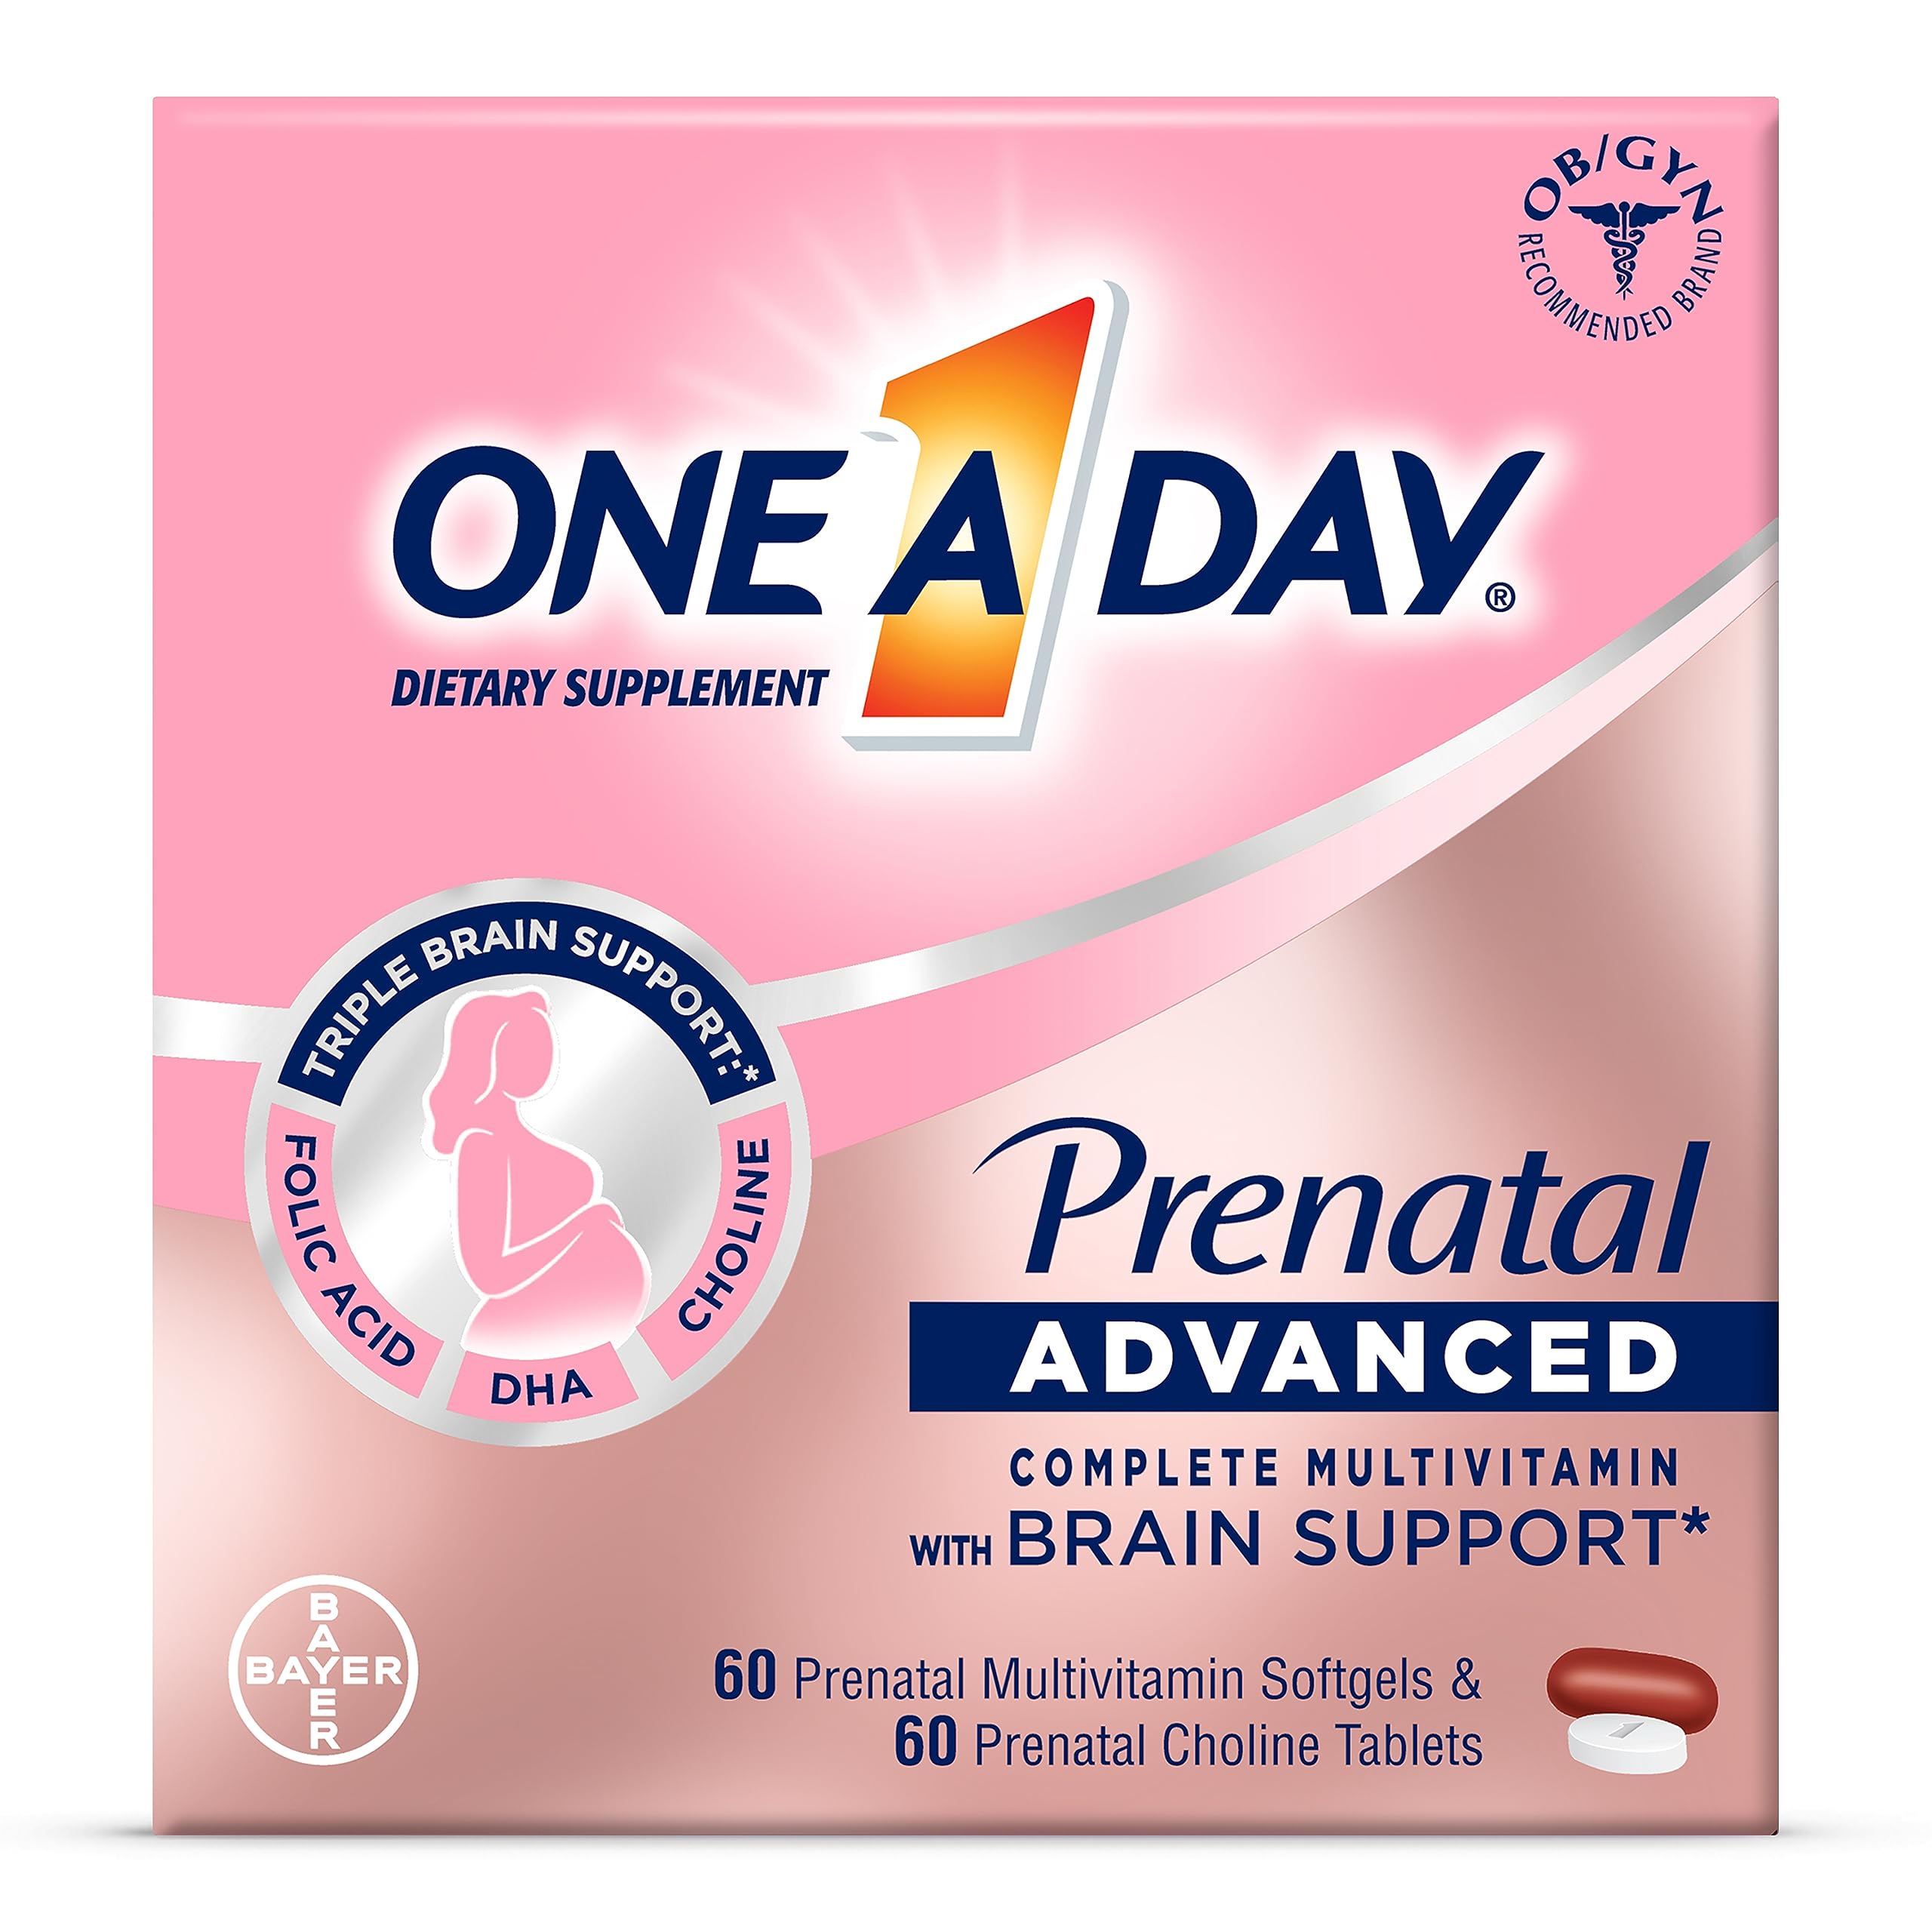 One A Day Prenatal Advanced Complete Multivitamin with Brain Support (120 Ct, 60 Day Supply) from $16.04 w/ S&S + Free Shipping w/ Prime or $35+ orders